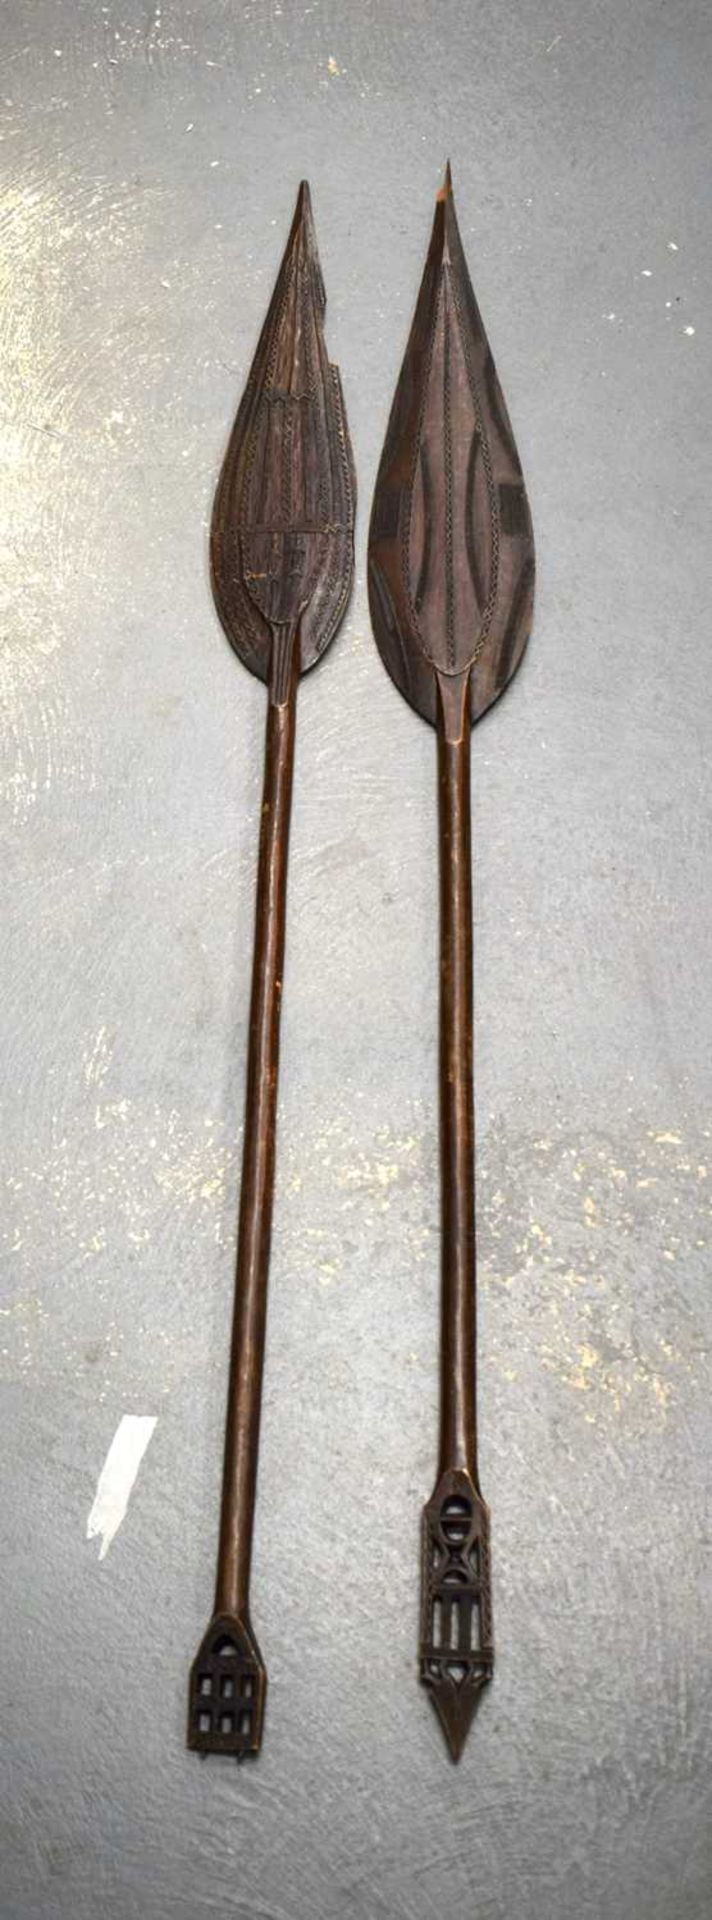 TWO AFRICAN TRIBAL CARVED WOOD PADDLES one decorated with animals, the other with motifs. 160 cm